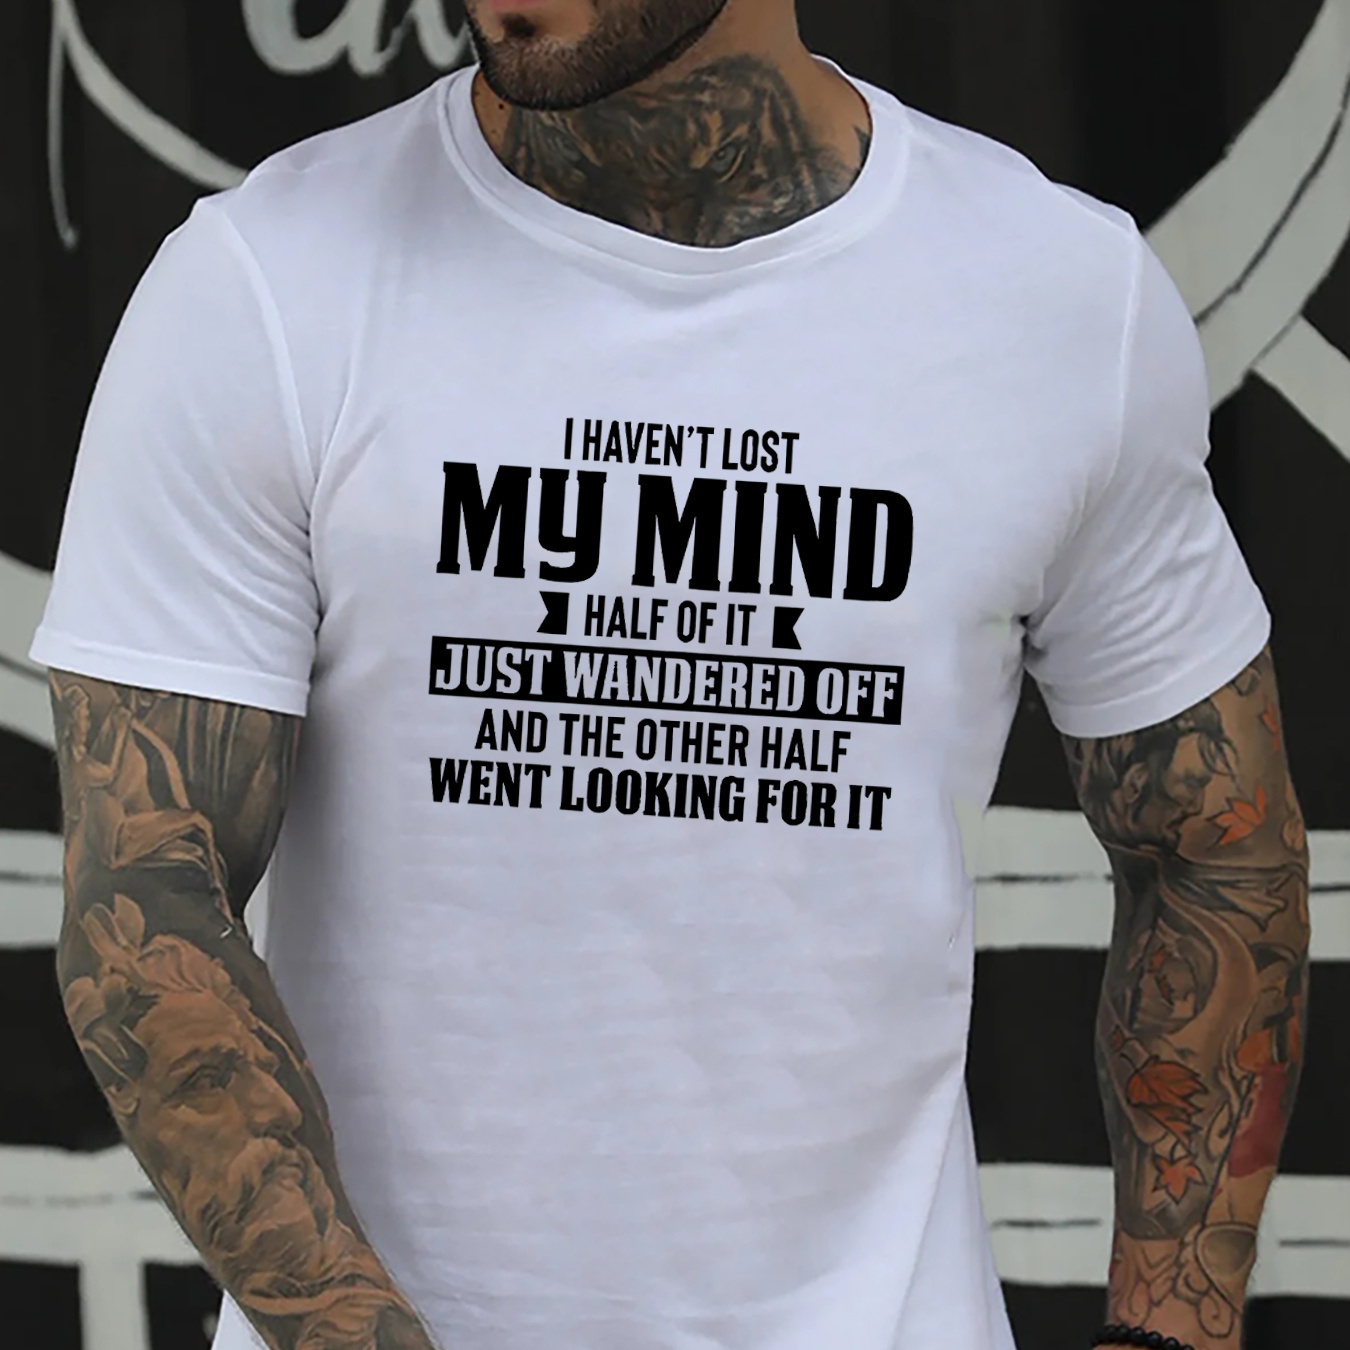 

1 Pc, 100% Cotton T-shirt, Mens Mind Print Premium Fit T-shirt - Ultra-comfortable, Summer-ready Tee For Daily Style - Bold Graphic, Casual Clothing Top